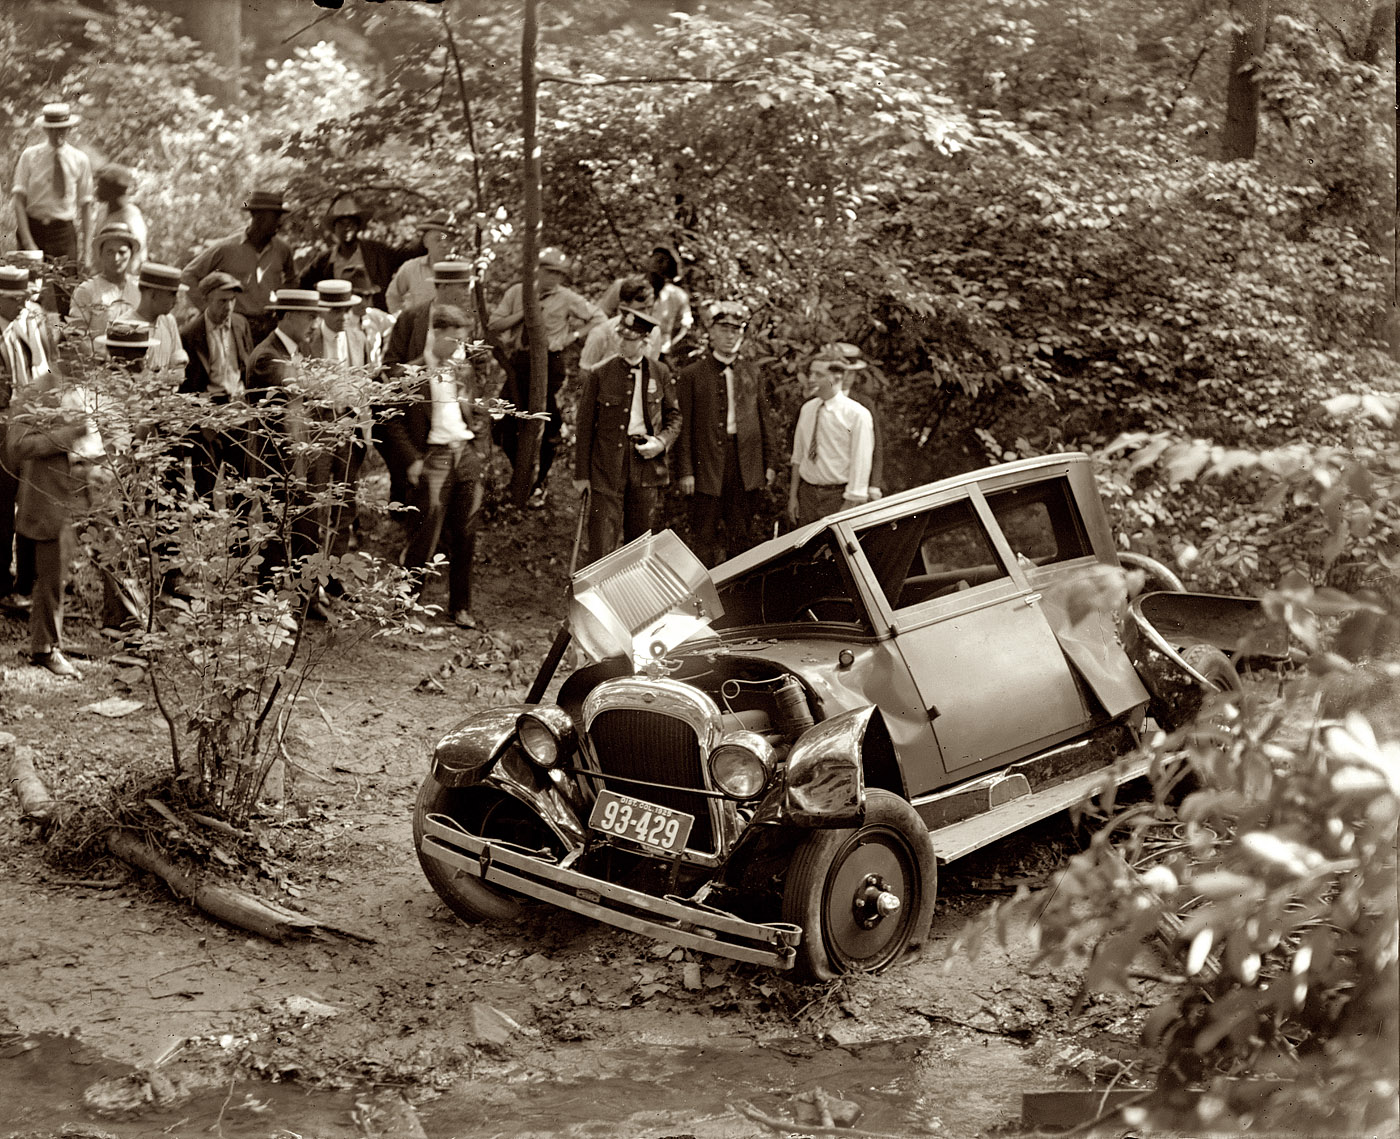 June 17, 1925. "Klingle Ford Bridge wreck" in Washington, D.C., just off (and under) Connecticut Avenue. 4x5 glass negative, National Photo Company Collection. View full size. Who can identify the car?